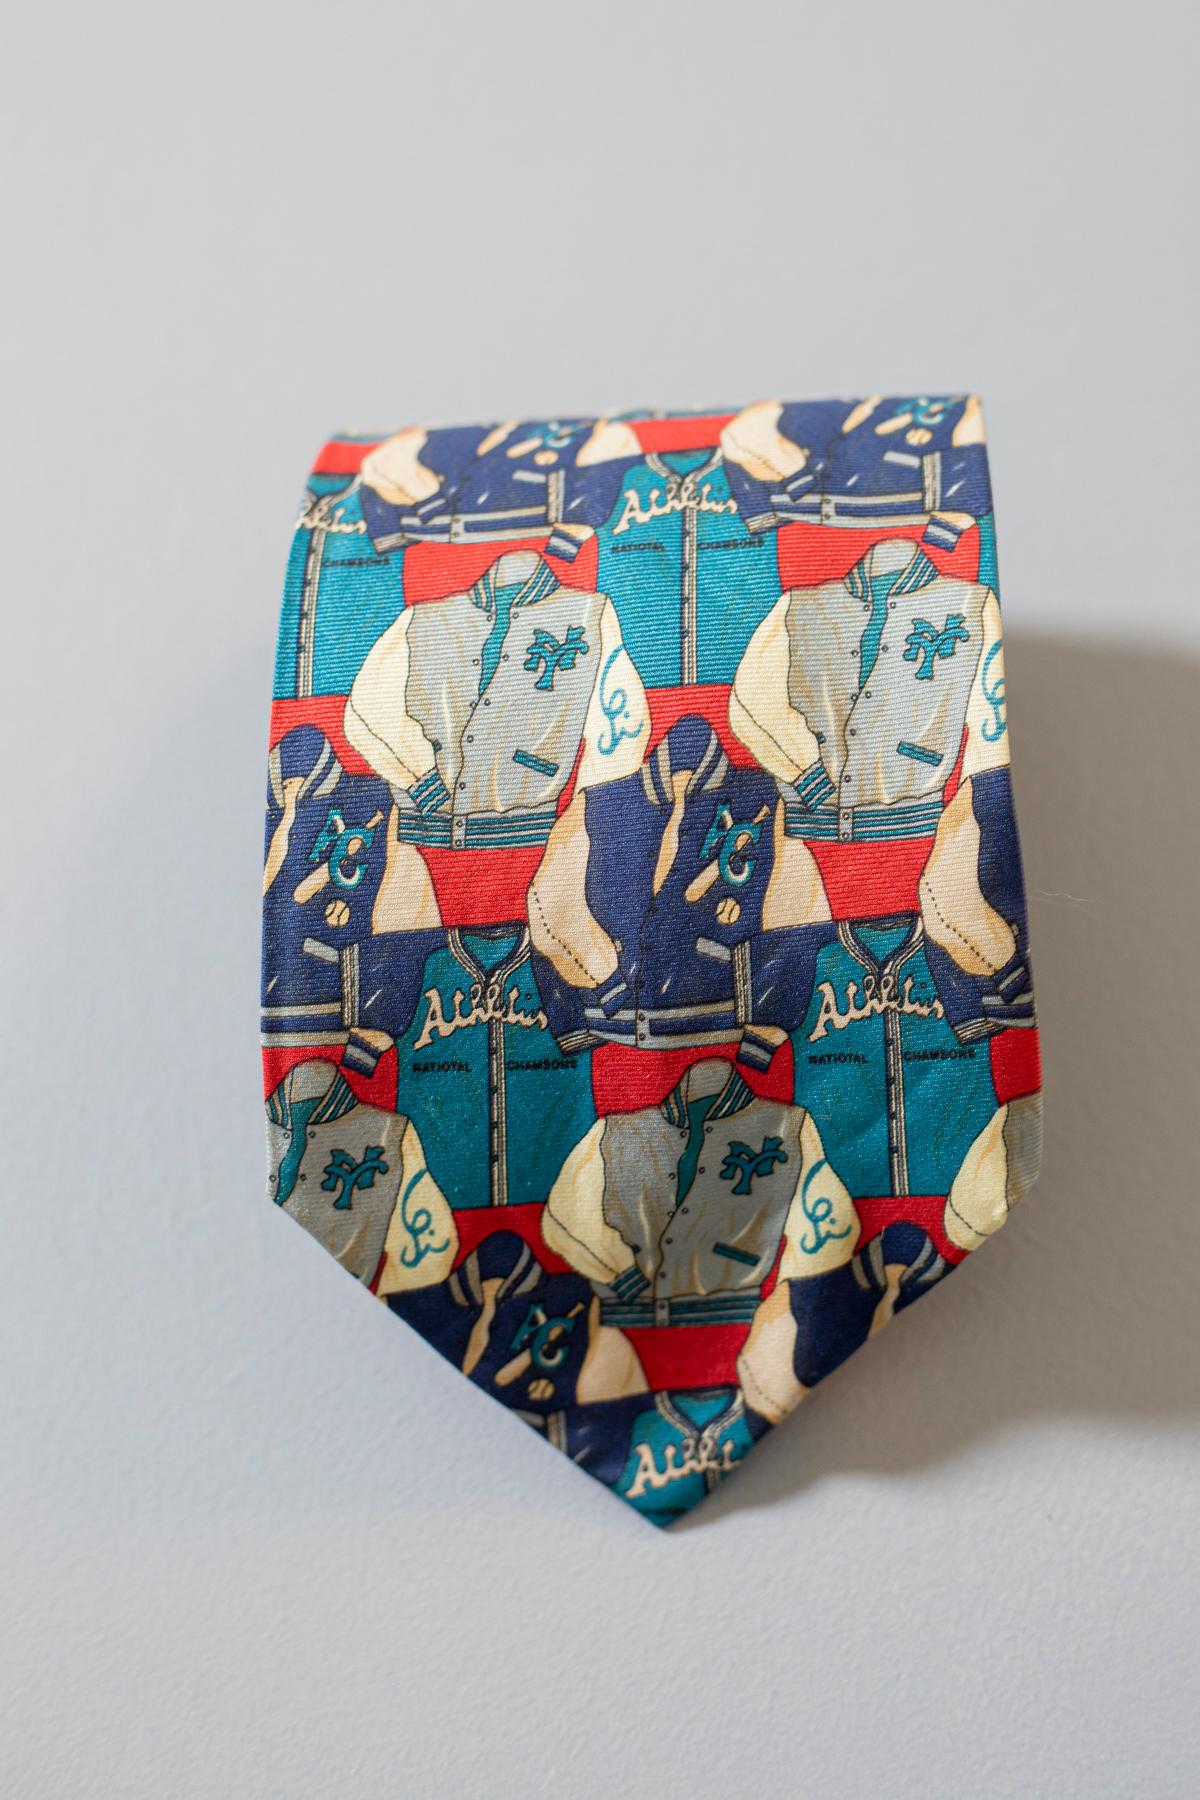 An ideal tie for lovers of an eccentric and never banal sporty look, made of 100% silk and of Italian manufacture. Decorated with blue, gray and white sports jackets on a red background.
Ideal for a playful evening with friends, perfect to be